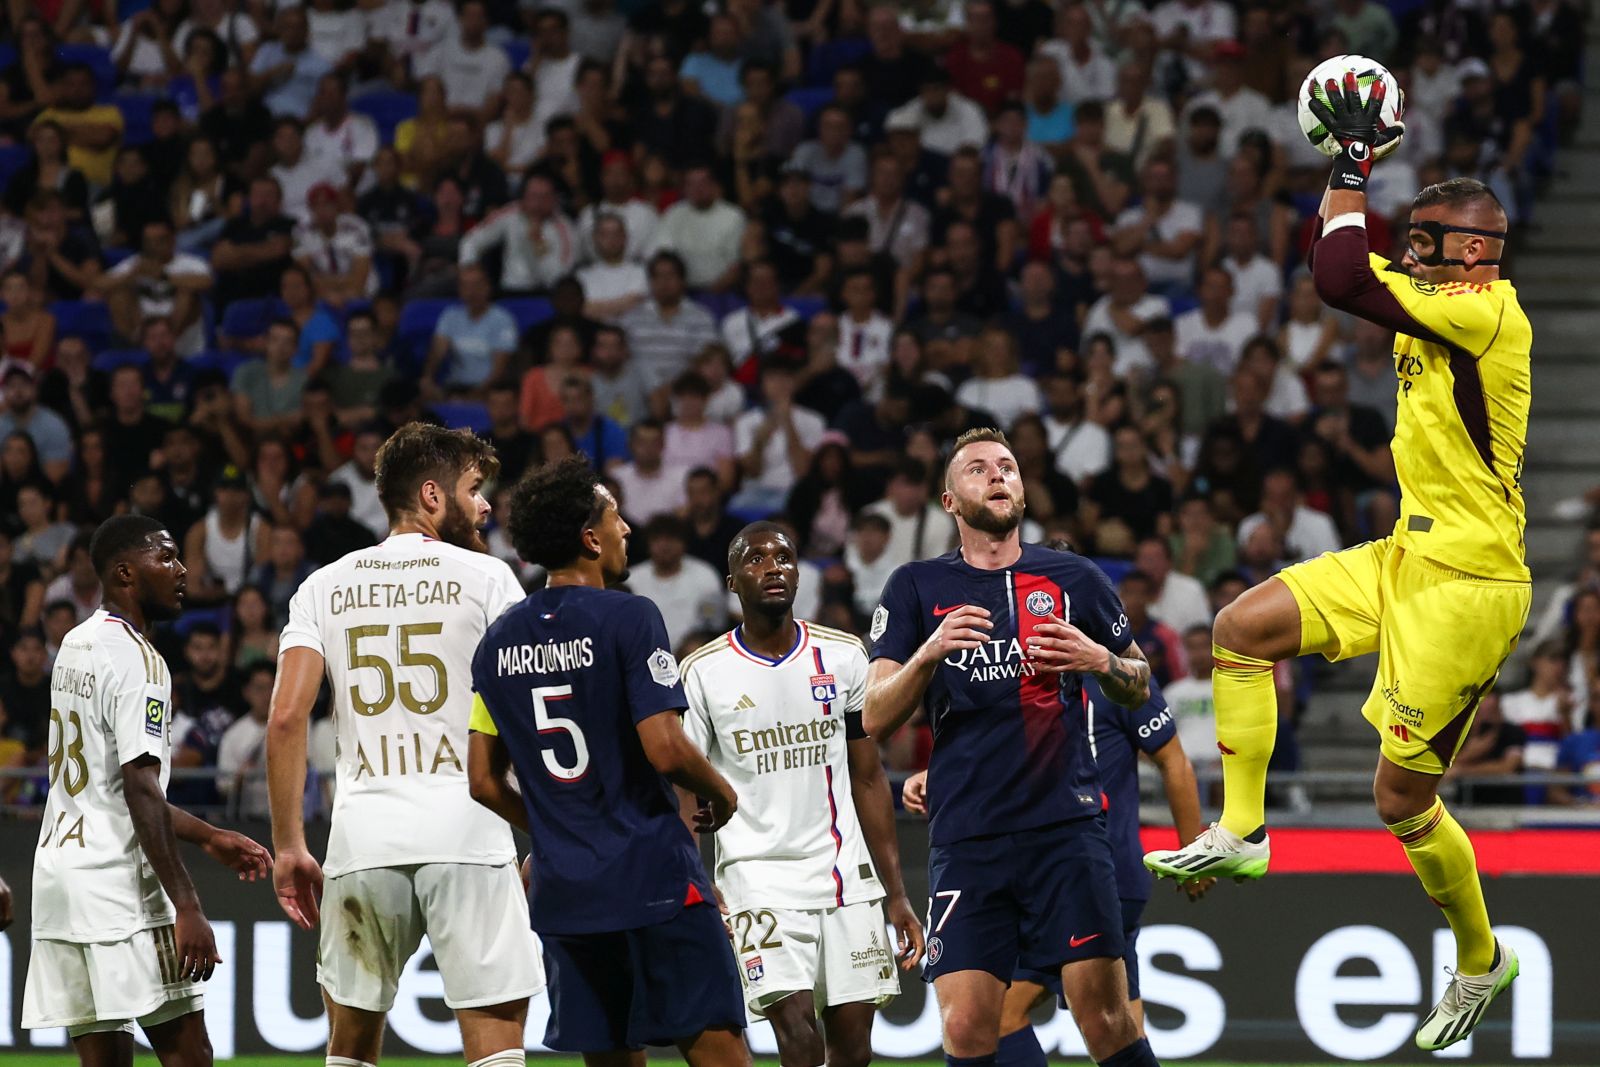 epa10838936 (L-R) Olympique Lyon's goalkeeper Anthony Lopes, Paris Saint Germain's Milan Skriniar, Olympique Lyon's Clinton Mata, Paris Saint Germain's Marquinhos, Olympique Lyon's Duje Caleta-Car and Olympique Lyon's Ainsley Maitland-Niles in action during the French Ligue 1 soccer match between Olympique Lyonnais and Paris Saint-Germain (PSG) in at the Groupama Stadium in Decines-Charpieu near Lyon, France, 03 September 2023.  EPA/MOHAMMED BADRA